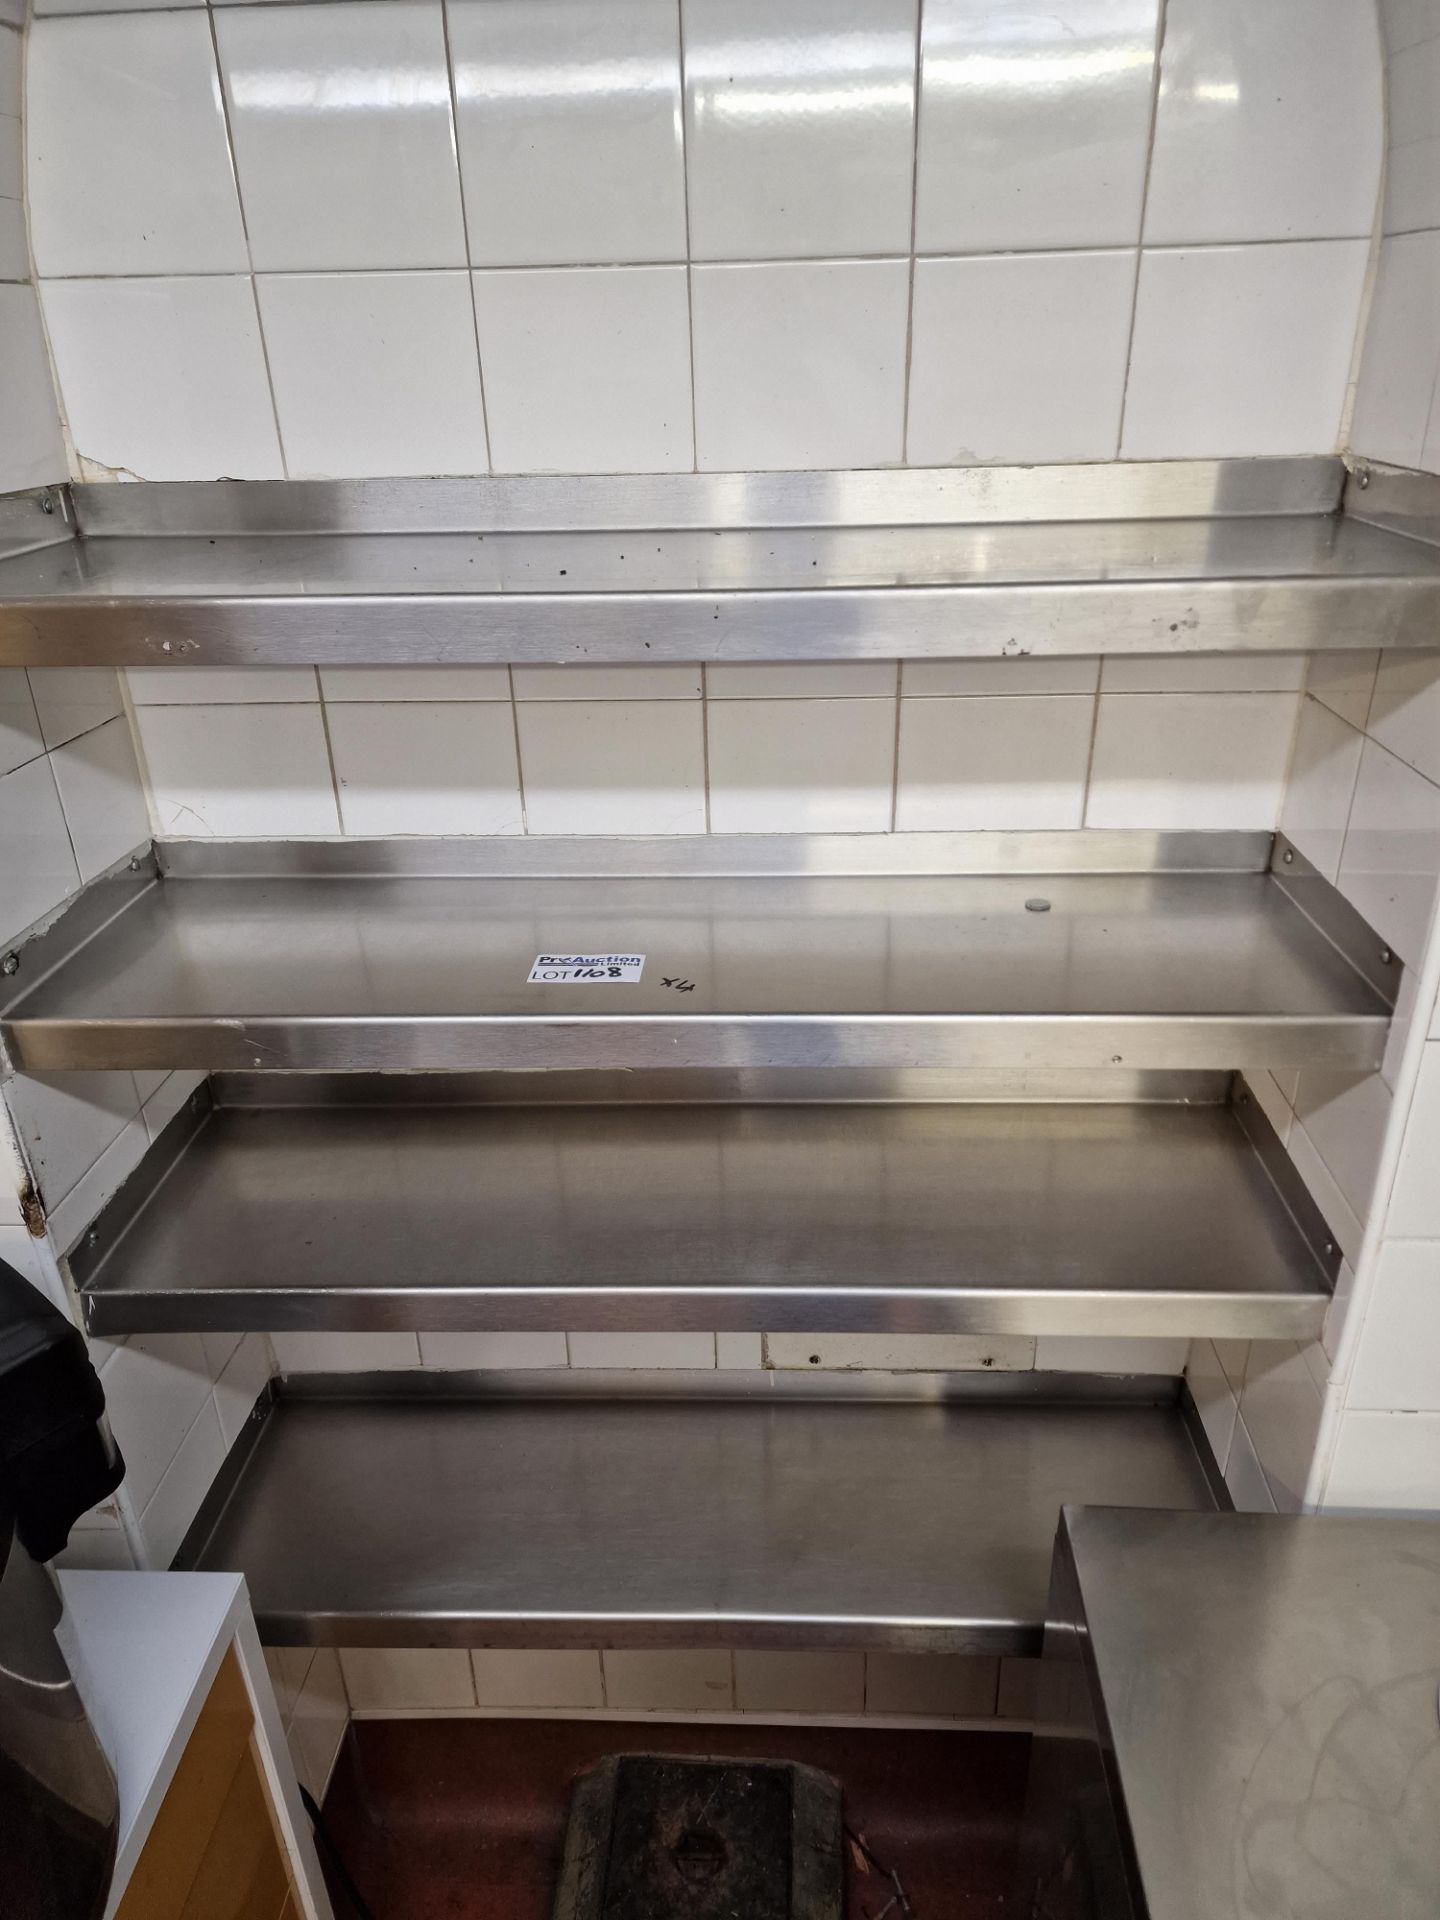 4 x Stainless Steel Wall Mounted Shelves 92 x 25cm